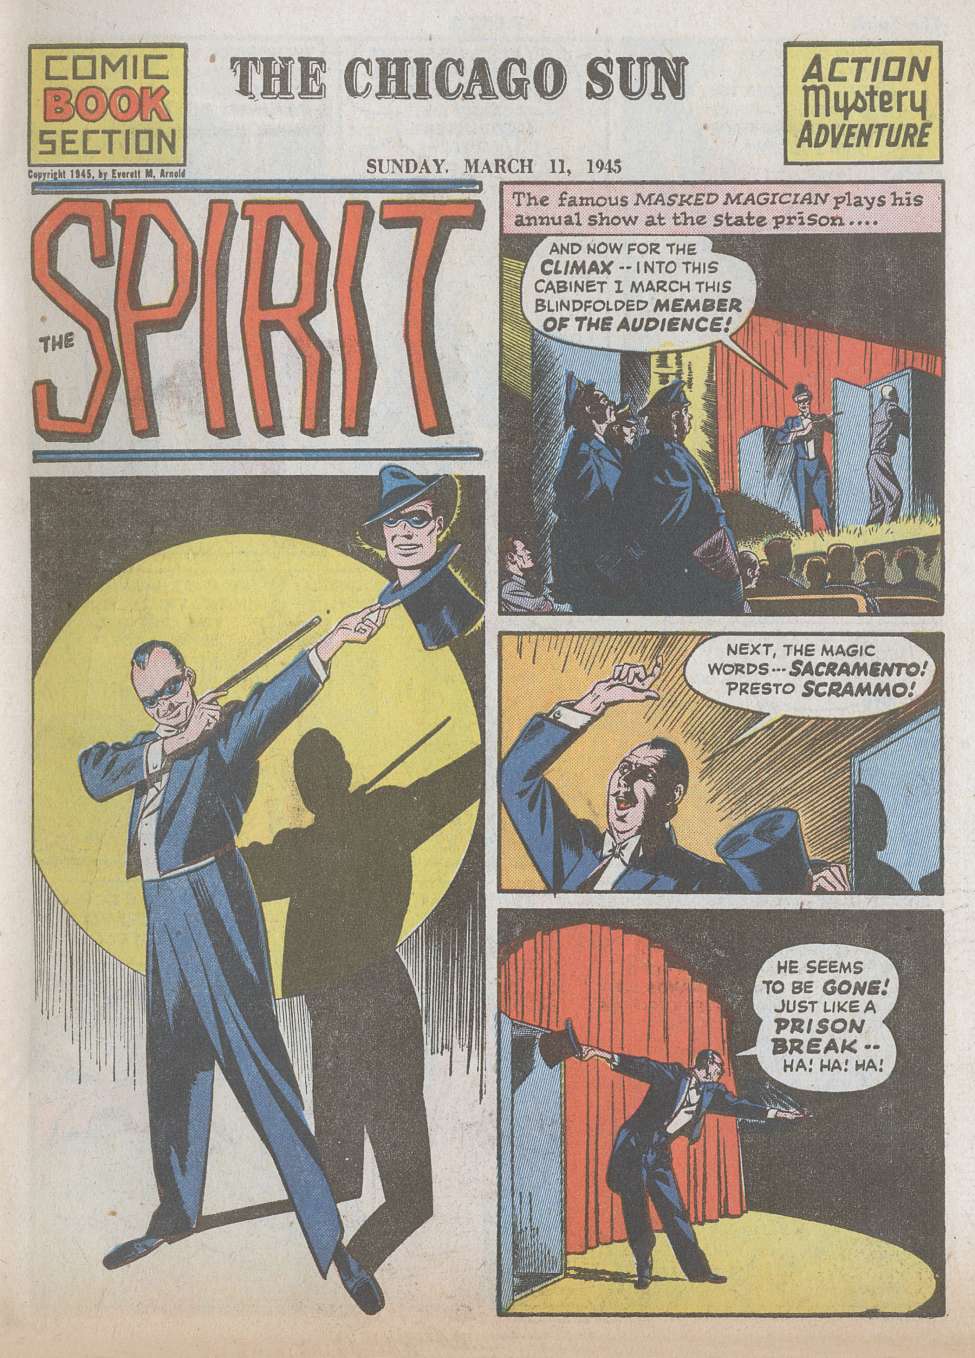 Comic Book Cover For The Spirit (1945-03-11) - Chicago Sun